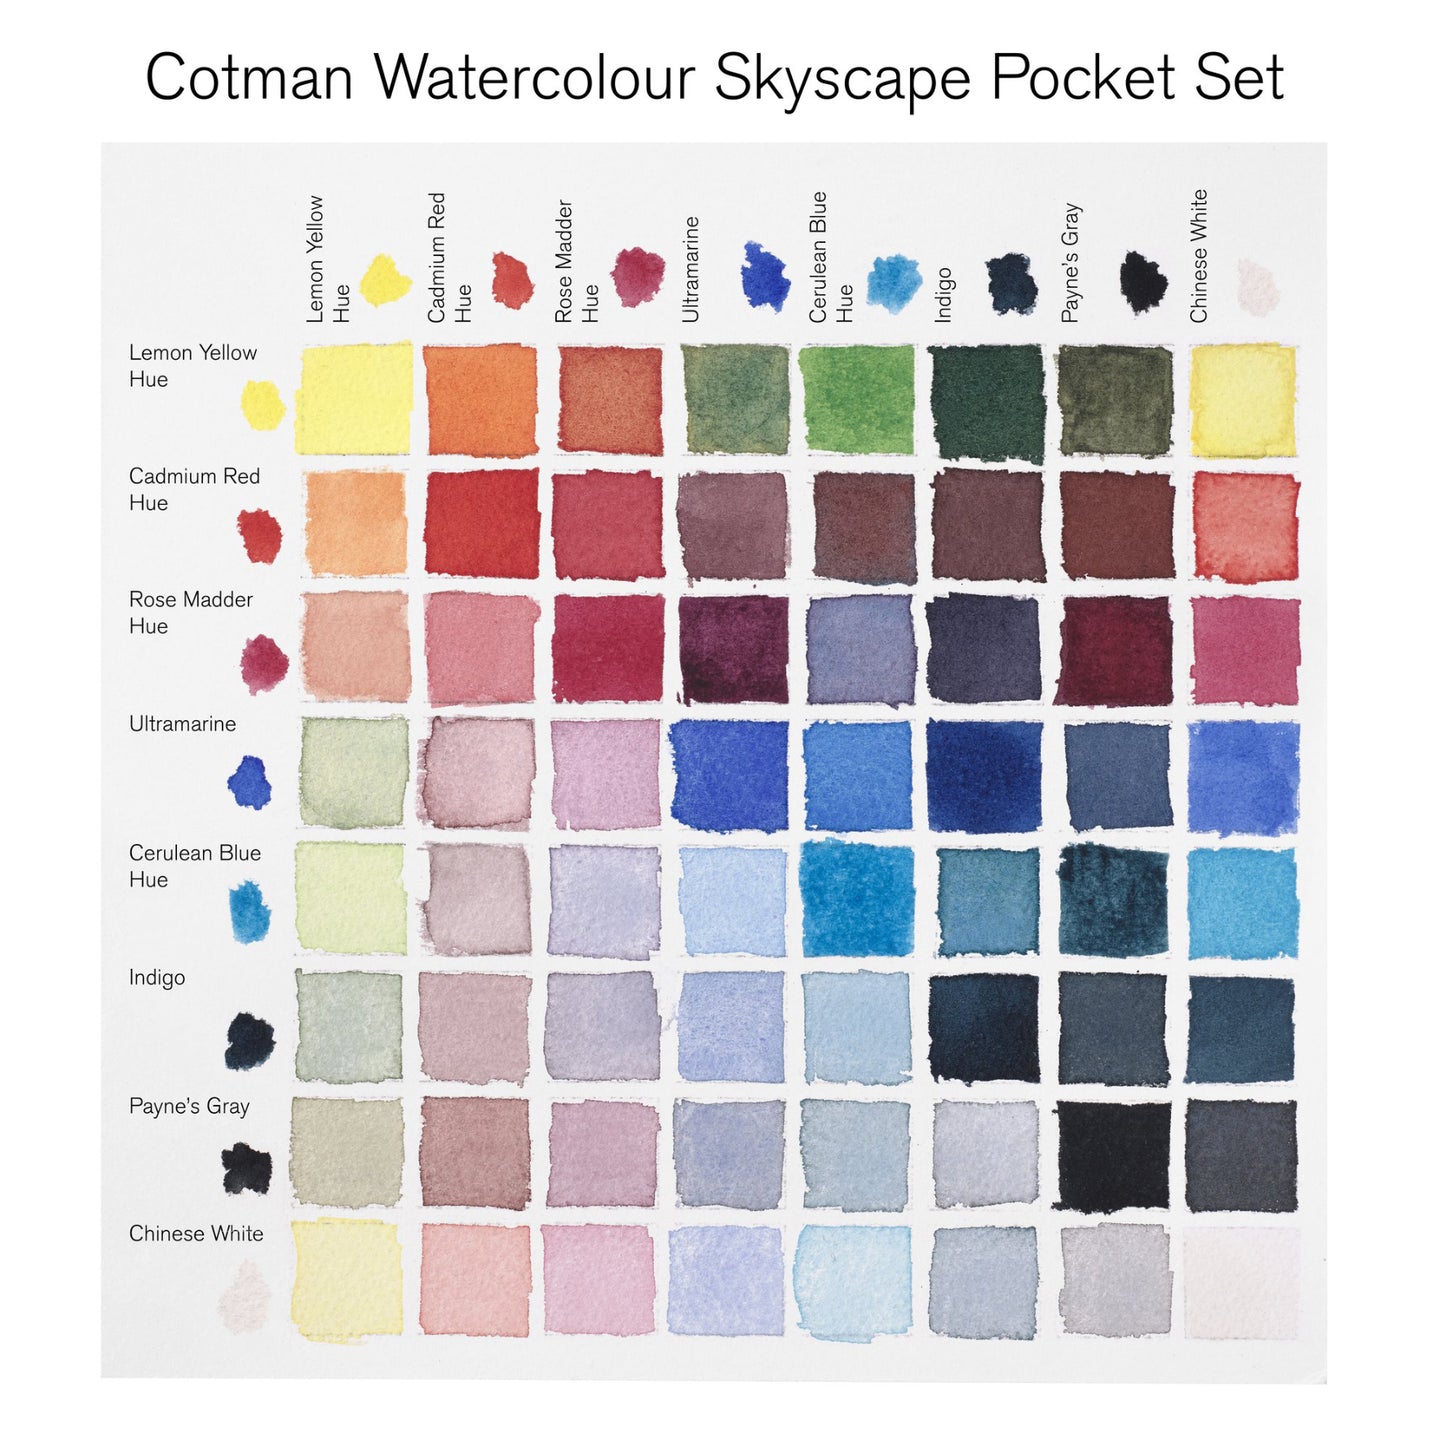 Cotman Watercolour Landscape pocket set colour chart demonstrates the colour spectrum that can be mixed using the 8 available half pans in this set. This palette has been carefully curated for painting skyscape and coastal scenes. 